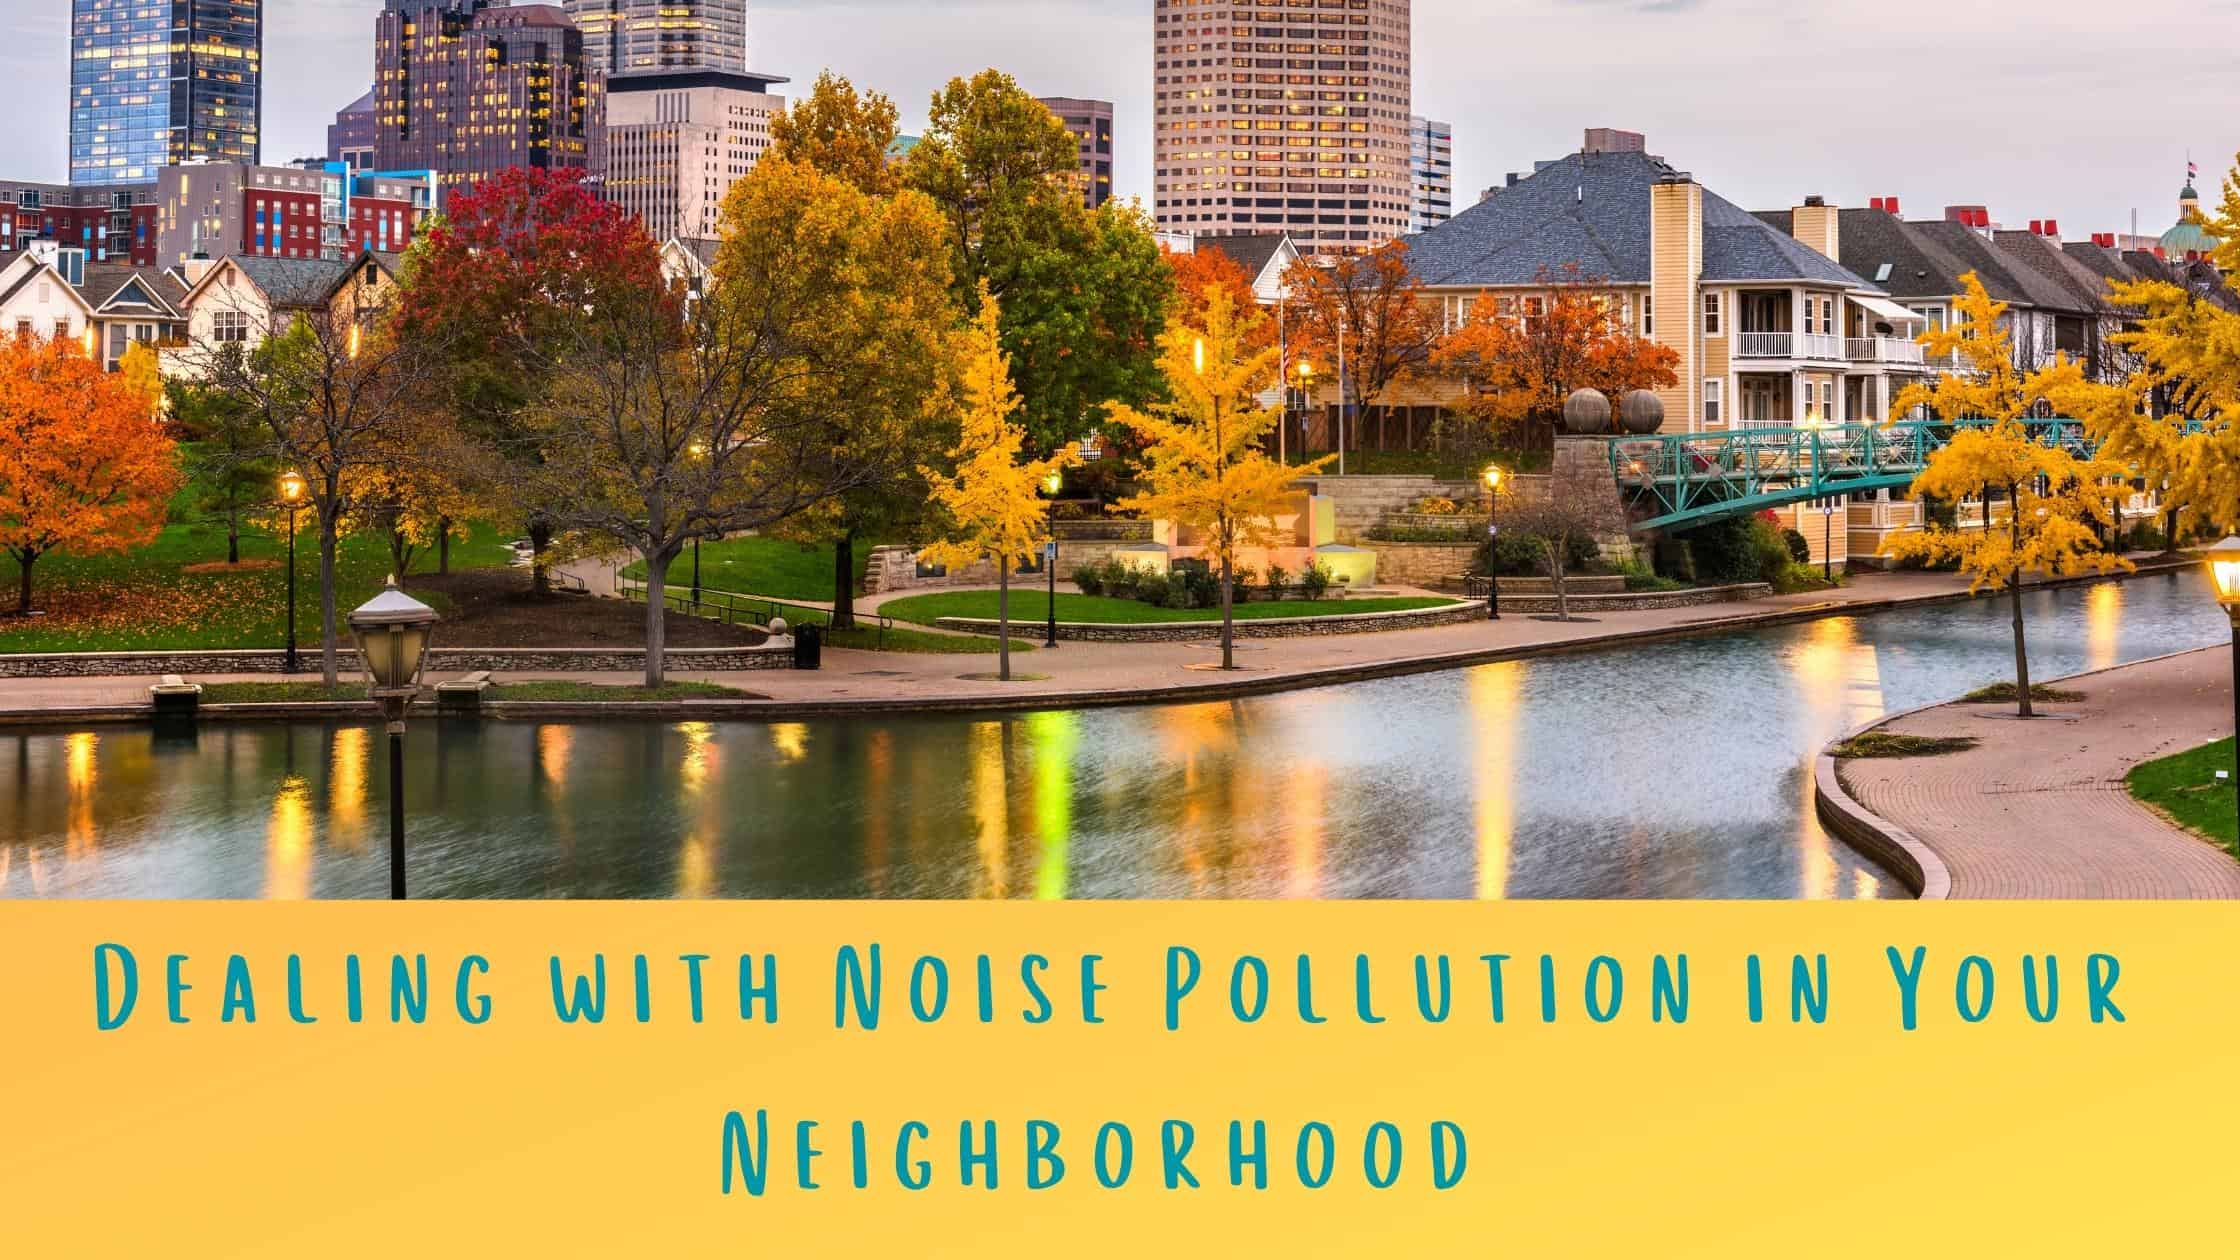 Featured image for “Dealing with Noise Pollution in Your Neighborhood ”